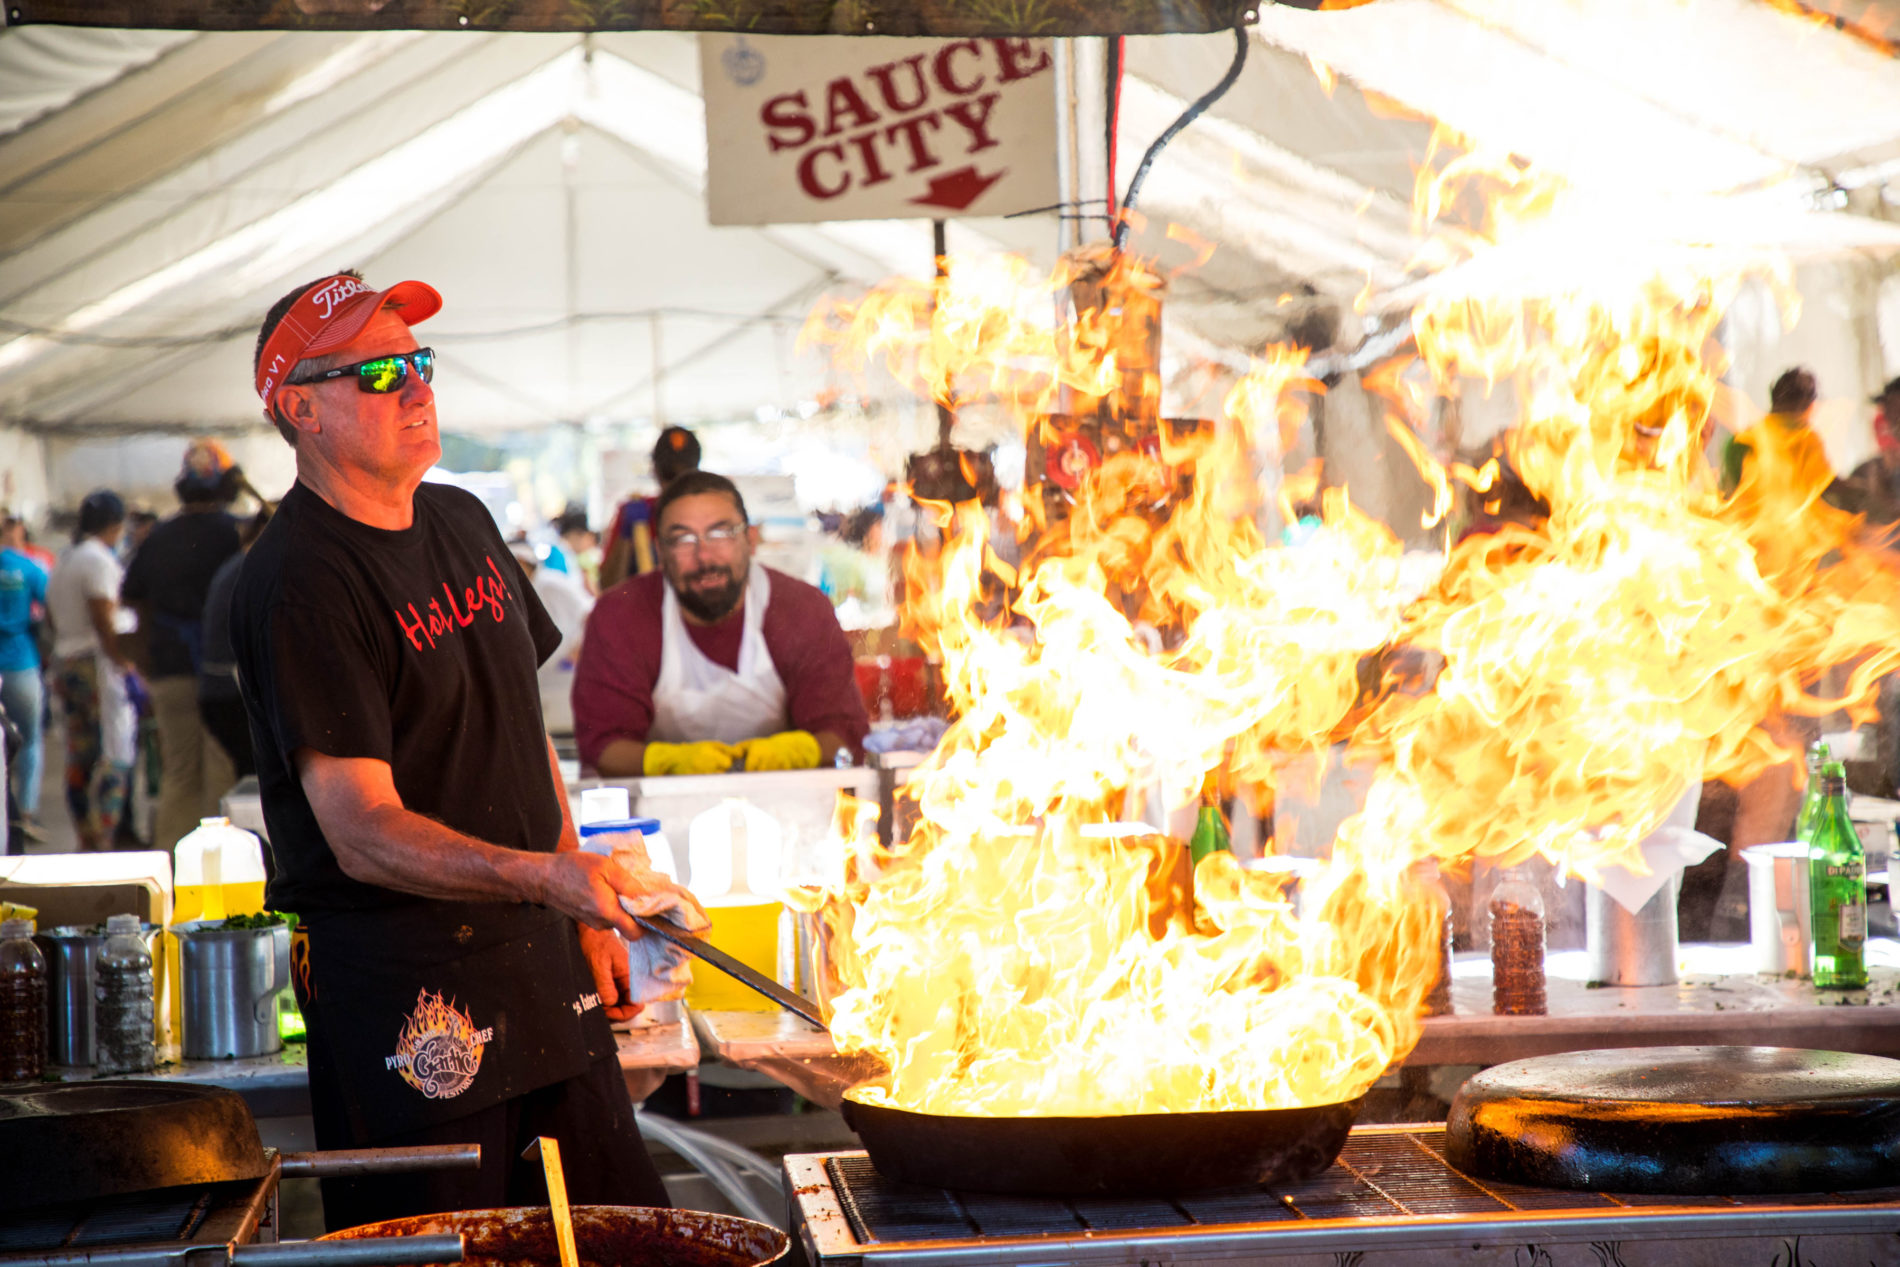 The Pyro chefs are fun to watch with their high flames at the garlic festival.